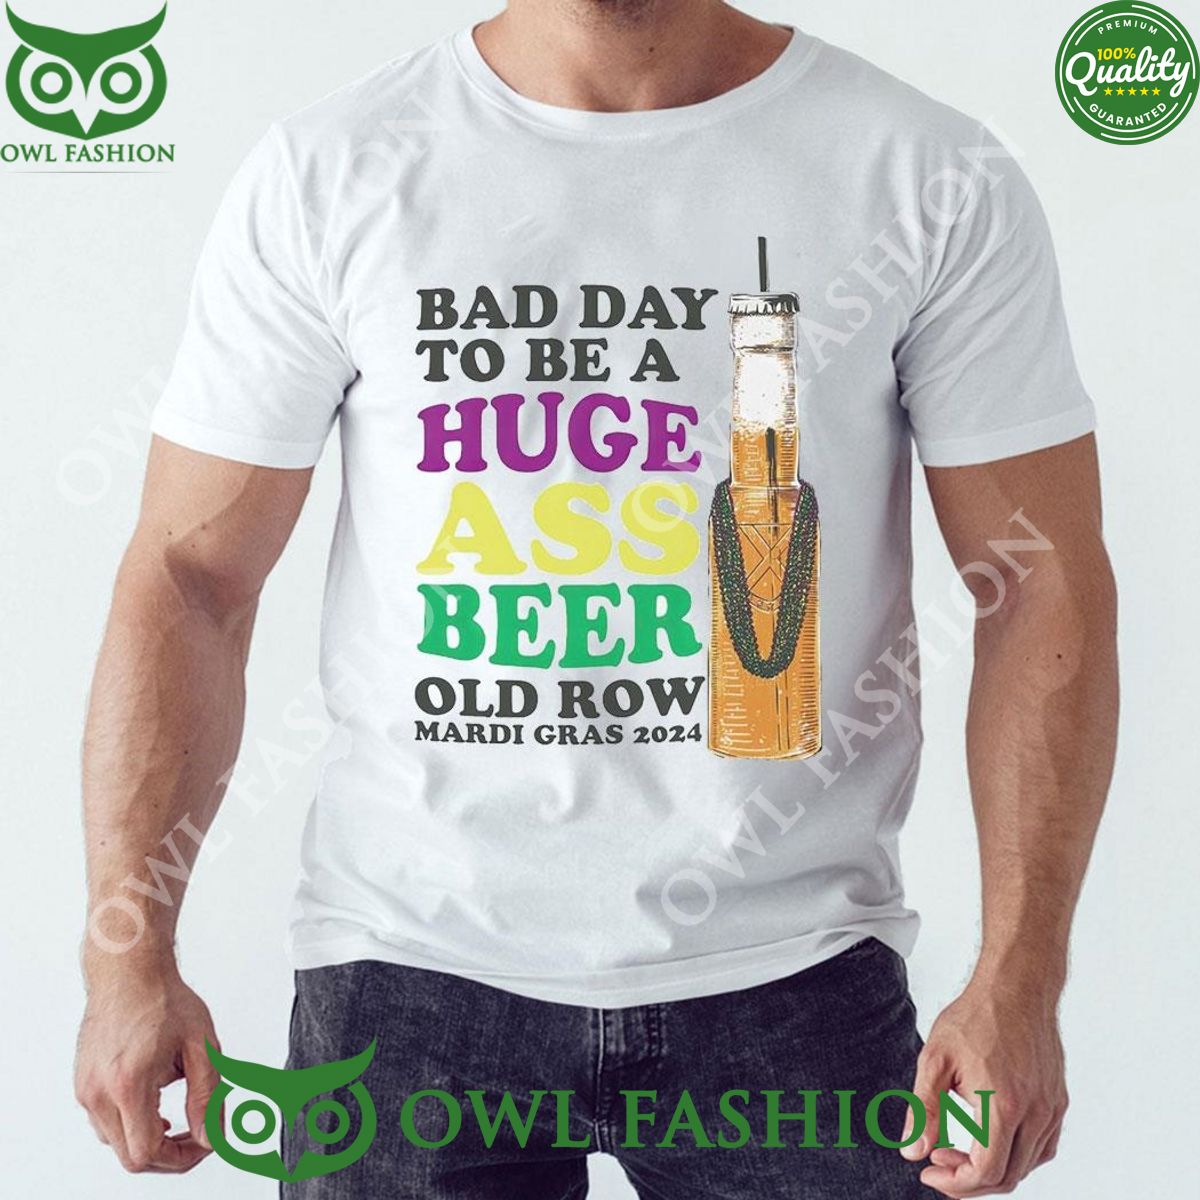 Bad Day To Be A Huge Ass Beer Old Row Mardi Gras 2024 Shirt